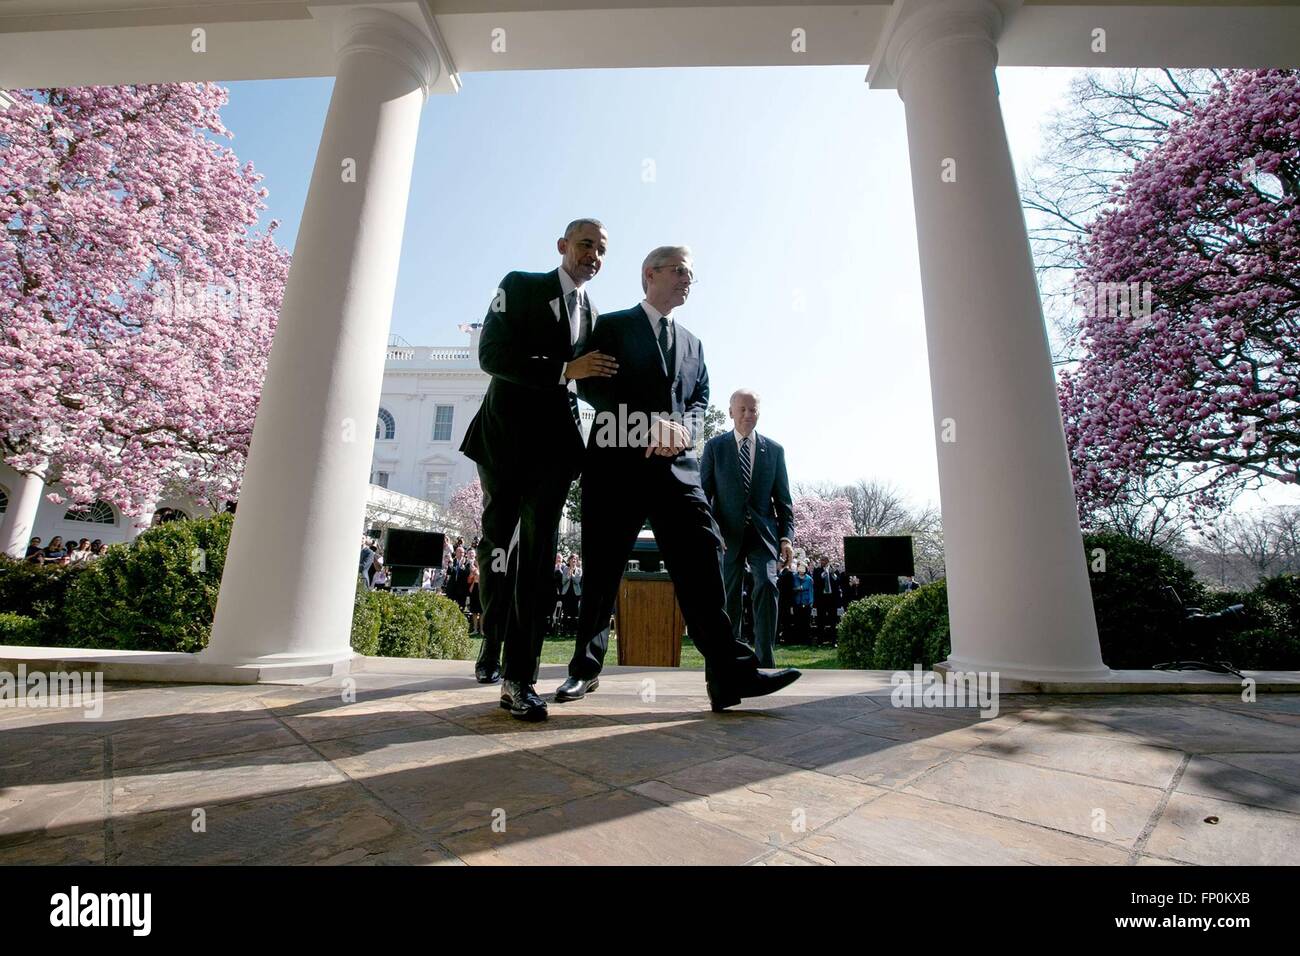 Washington DC, USA. 16th March, 2016. U.S. President Barack Obama walks through the Colonnade from the Rose Garden with Chief Judge Merrick B. Garland after announcing his nomination to the United States Supreme Court at the White House March 16, 2016 in Washington, DC. Stock Photo